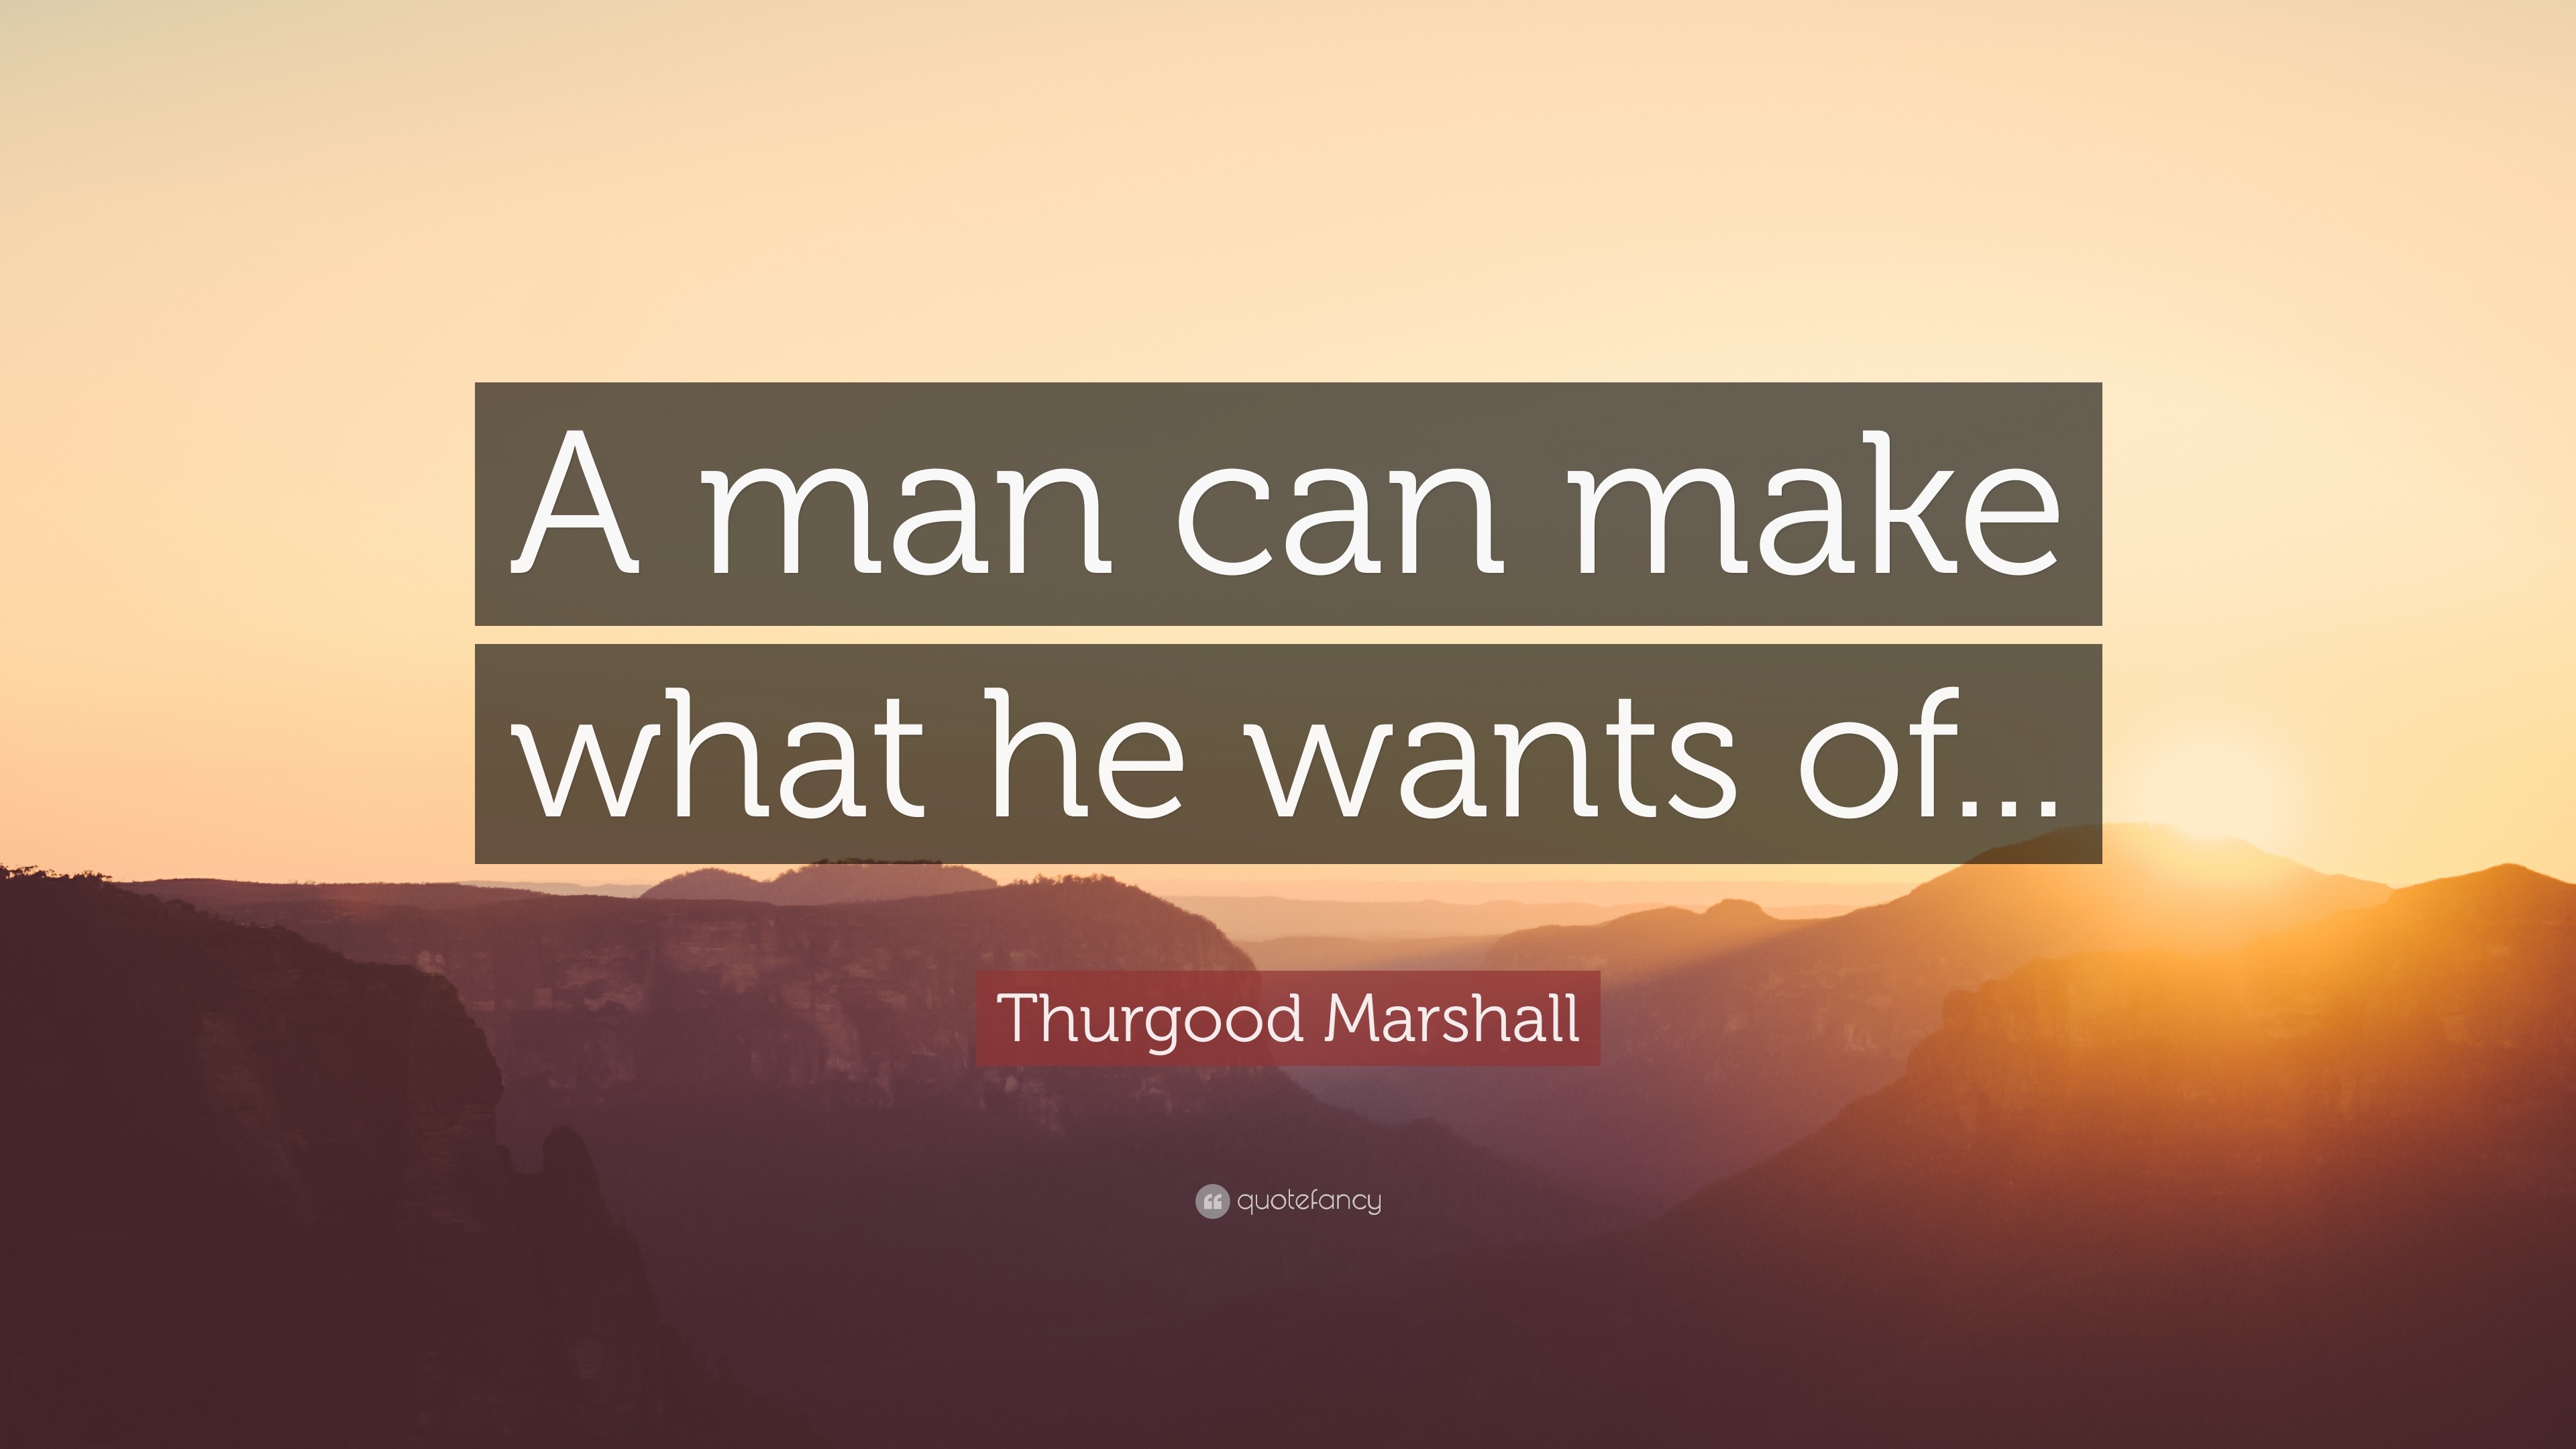 Thurgood Marshall Quotes (33 wallpapers) - Quotefancy